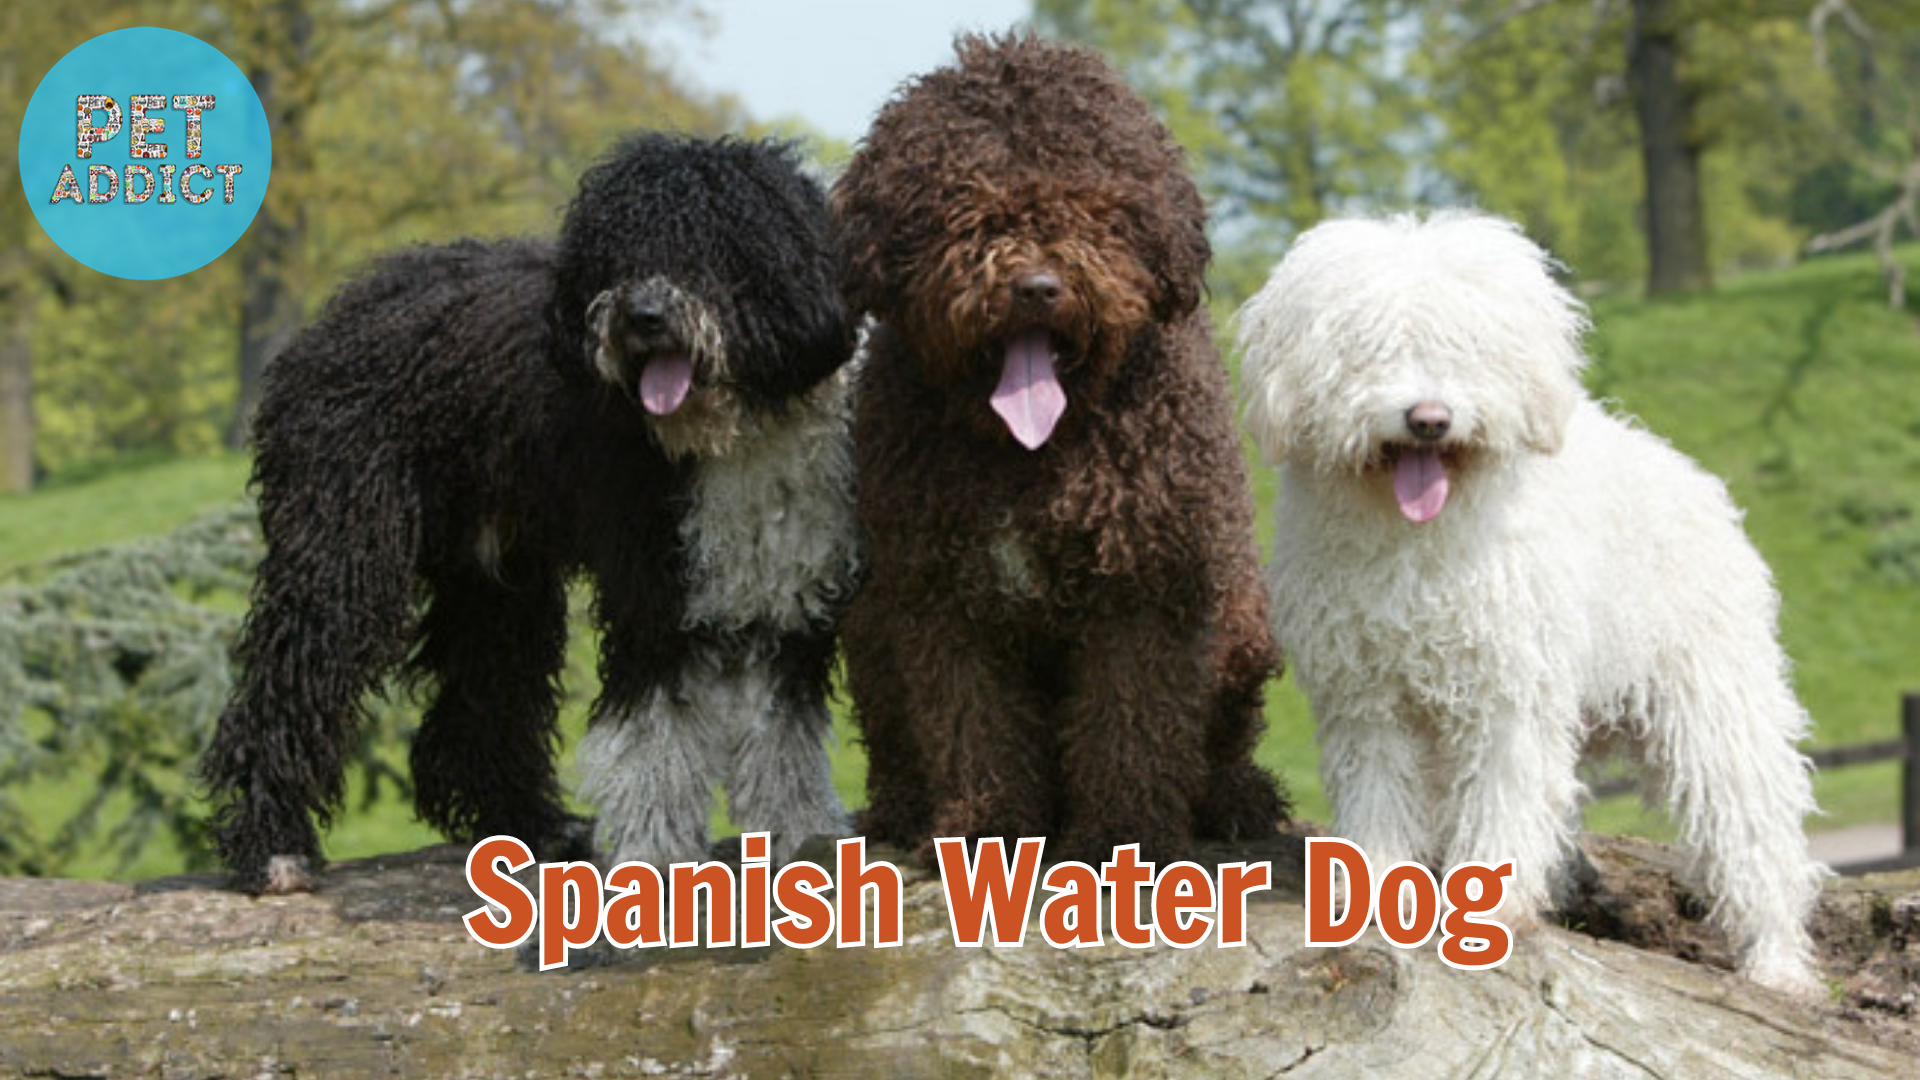 Spanish Water Dog: A Versatile and Unique Breed